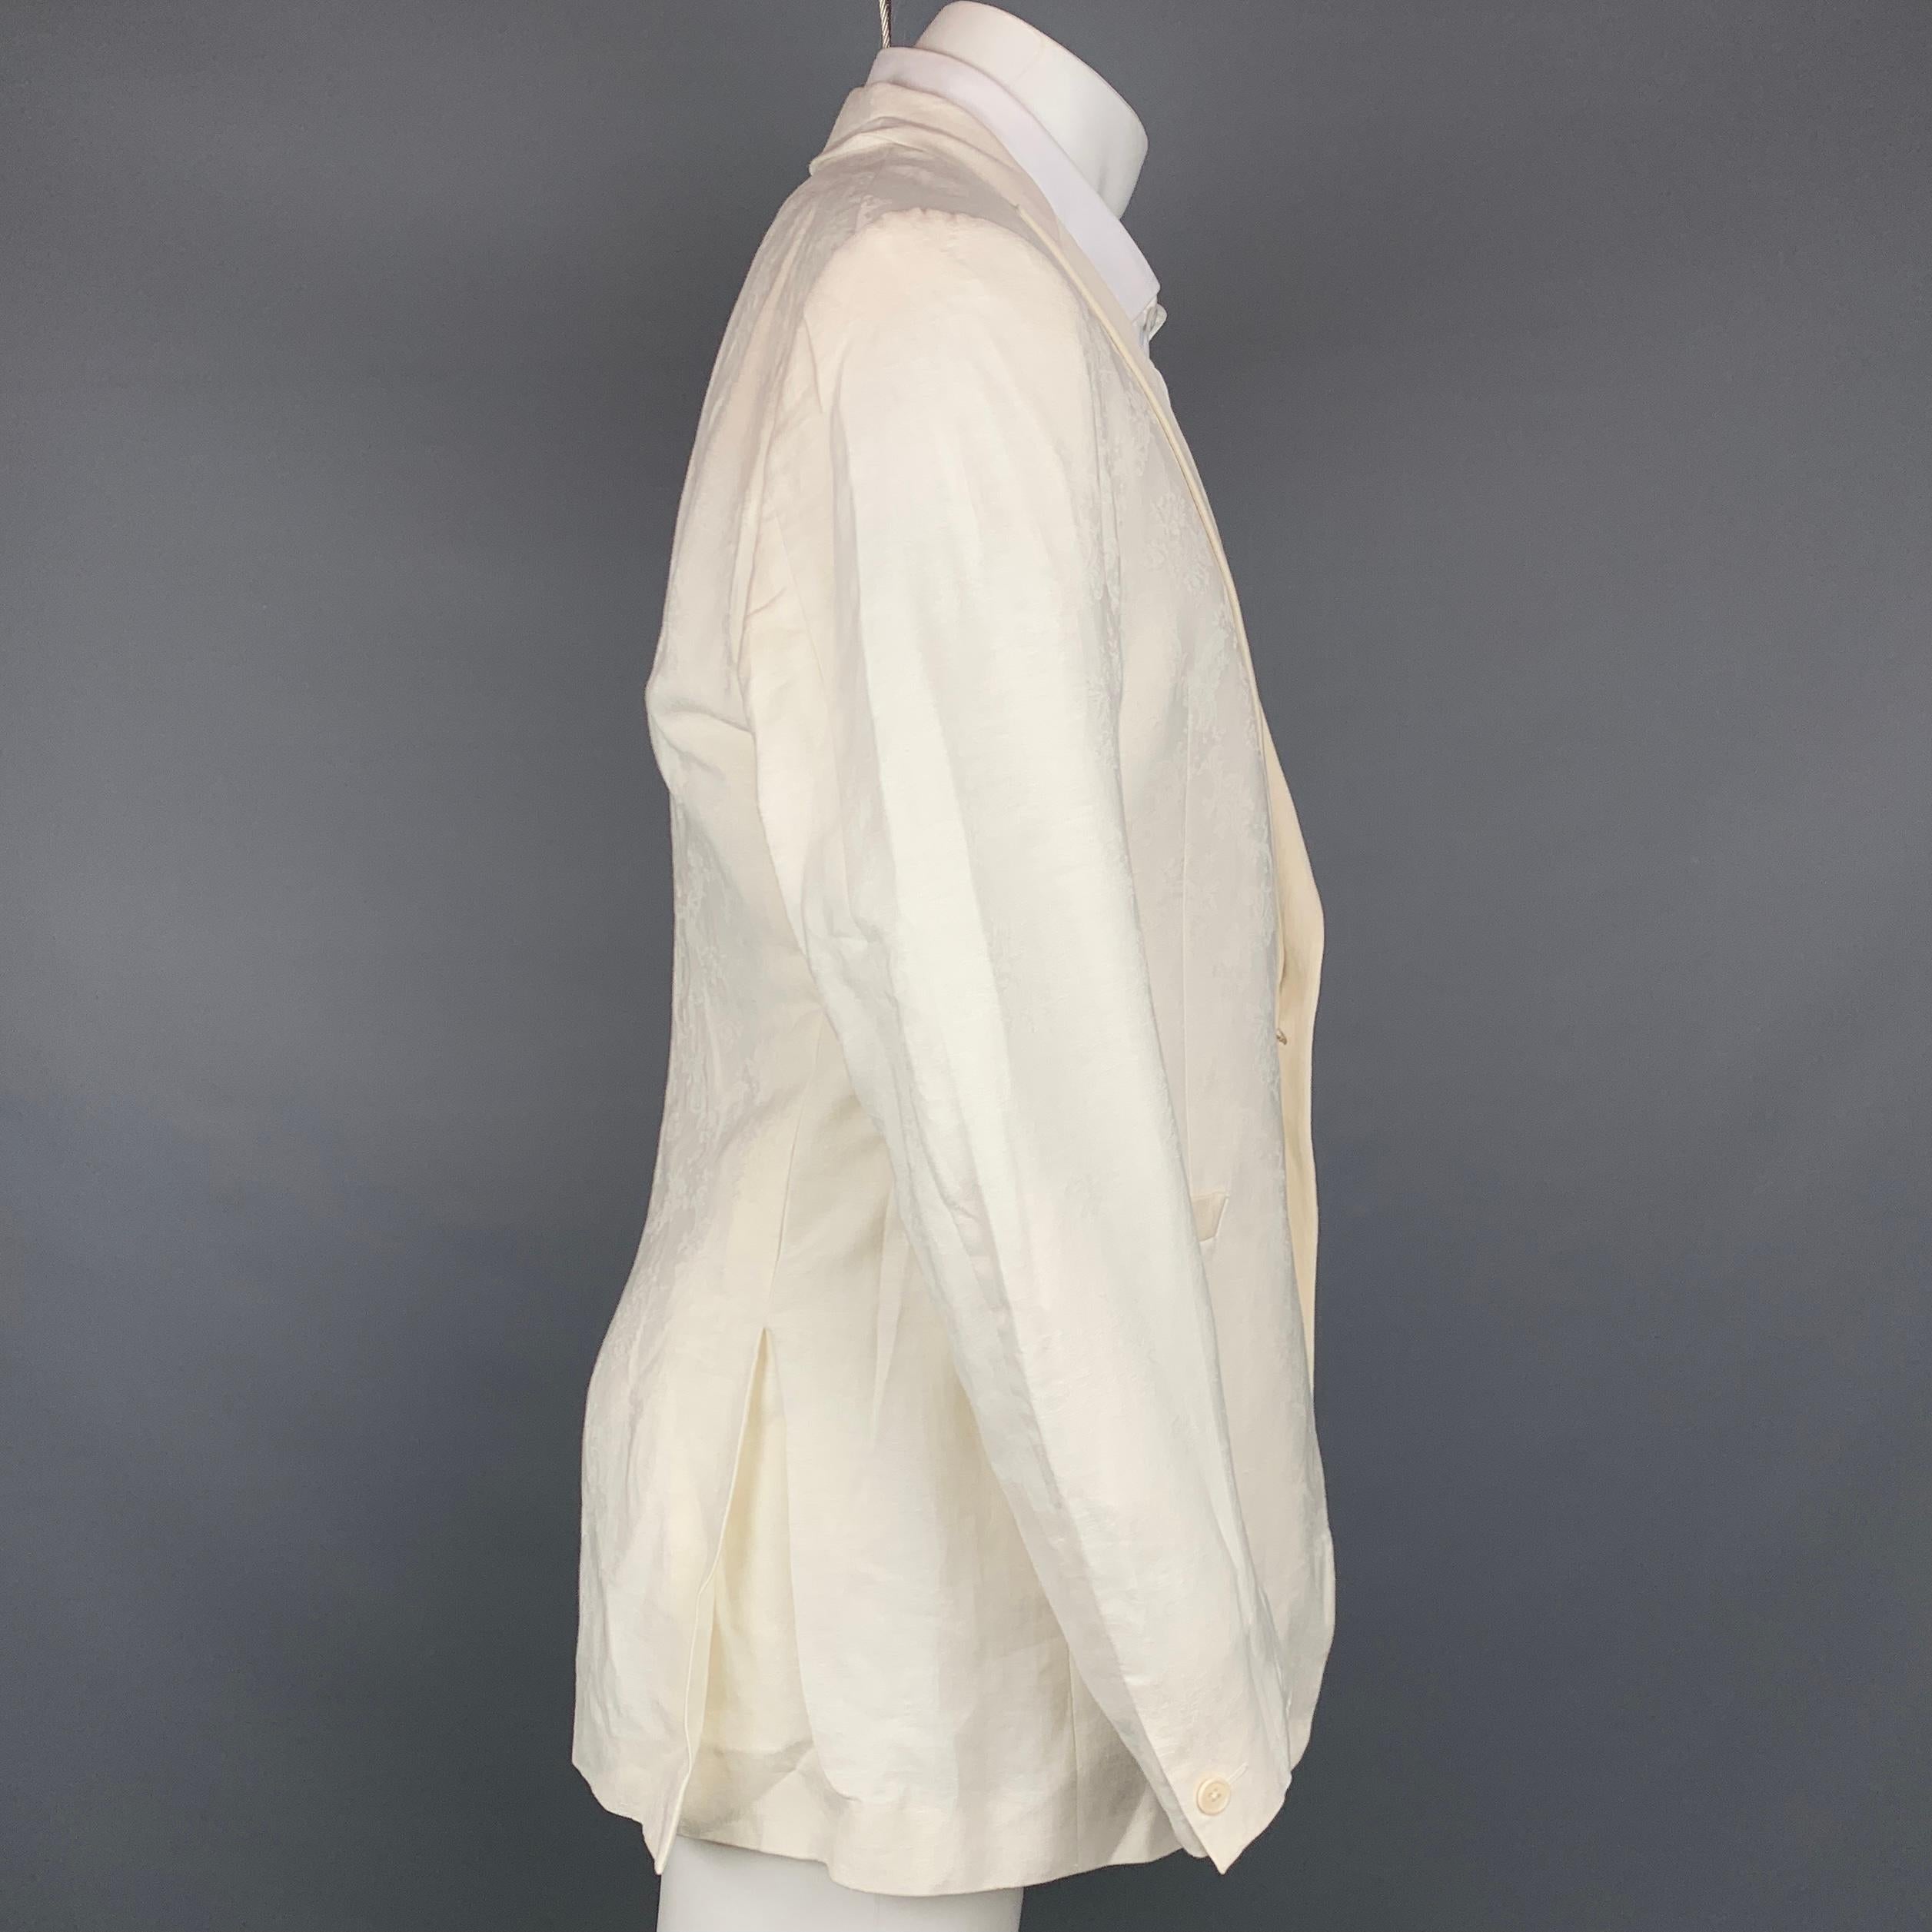 JOHN VARVATOS sport coat comes in a beige jacquard linen / cotton with a full liner featuring a peak lapel, slit pockets, and a single button closure. Made in Italy.

Very Good Pre-Owned Condition.
Marked: IT 52

Measurements:

Shoulder: 18.5